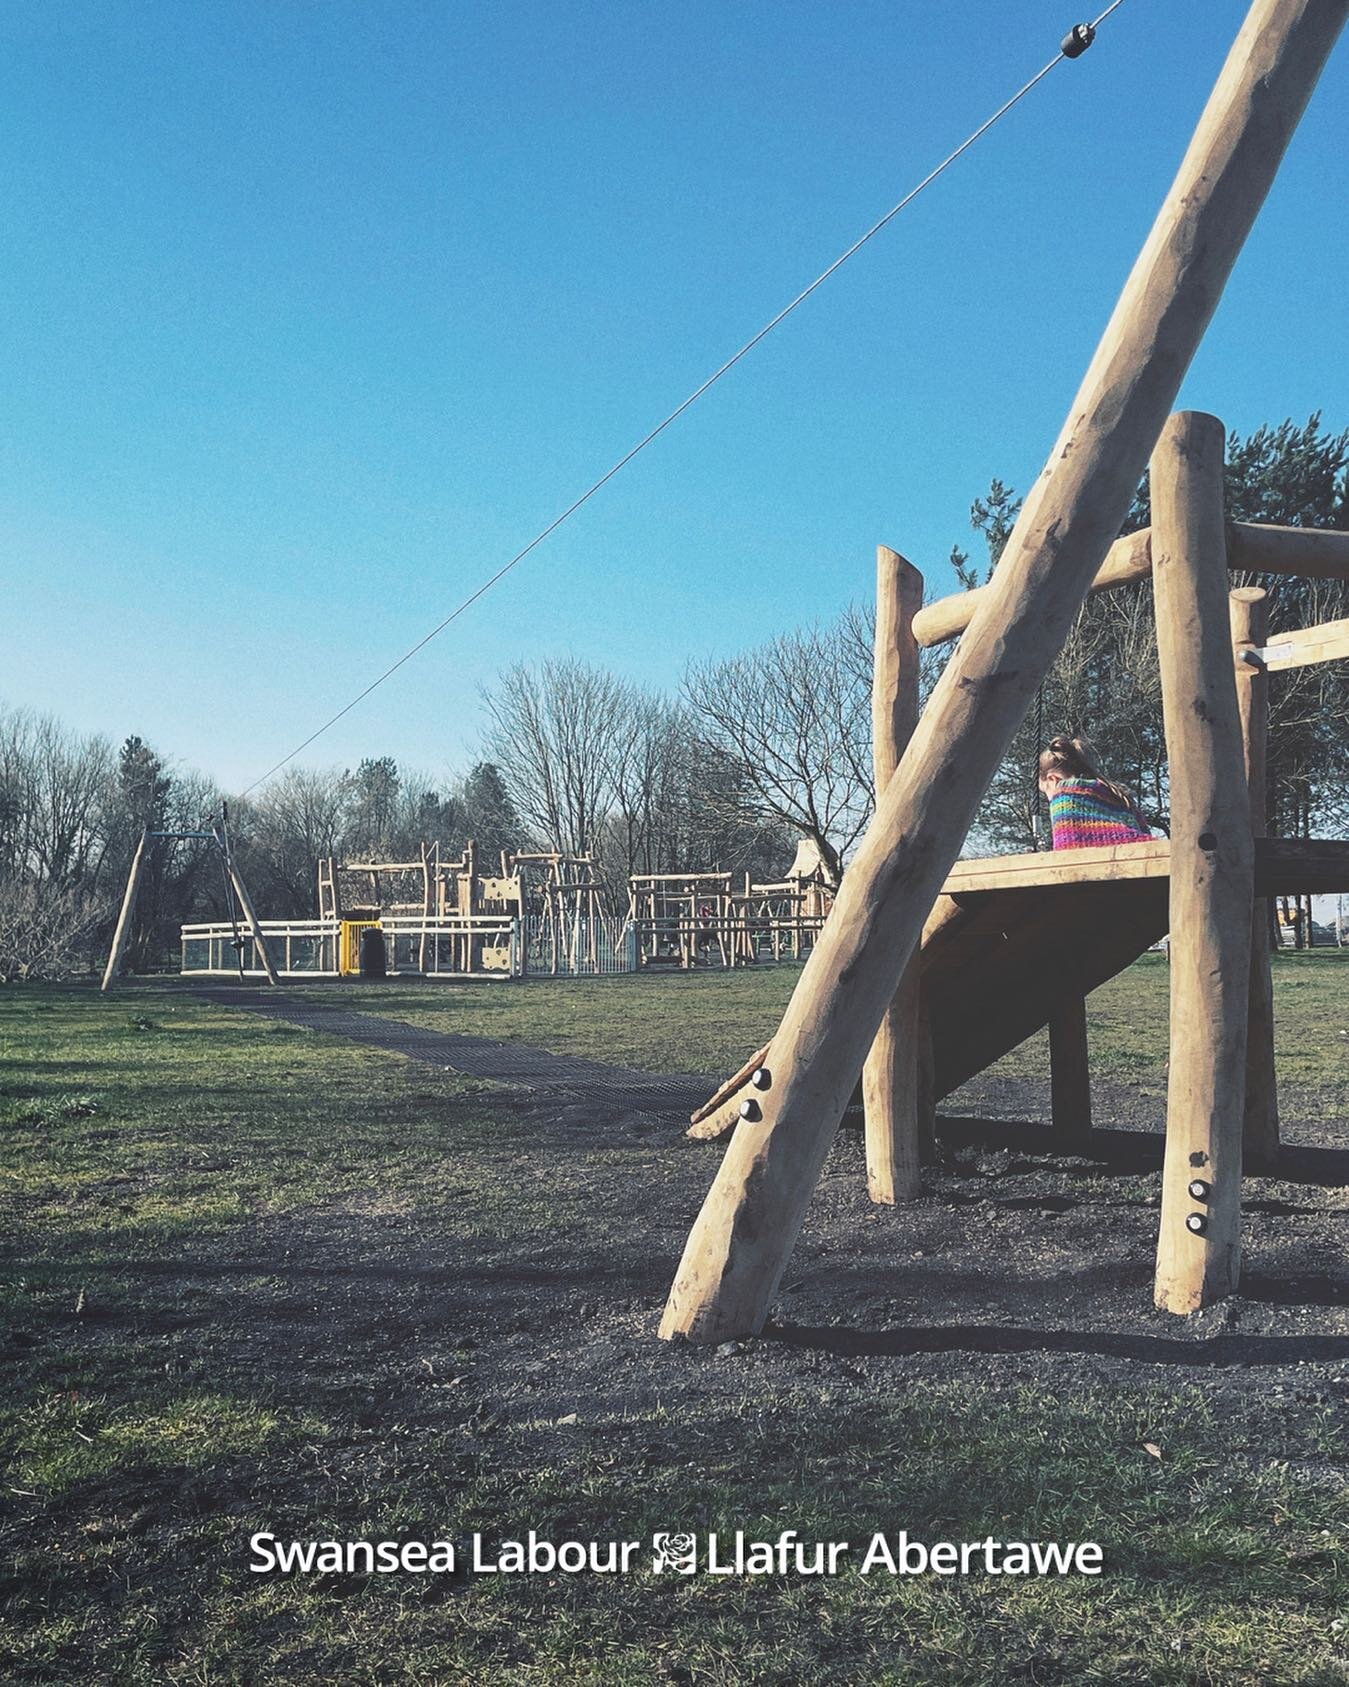 🎡 Swansea Labour have already invested over &pound;2.5m in upgrading and creating play facilities across the city &amp; county. 

🛝 A further &pound;2.5m will be invested to upgrade every council play area in Swansea.

👧 We believe that children h